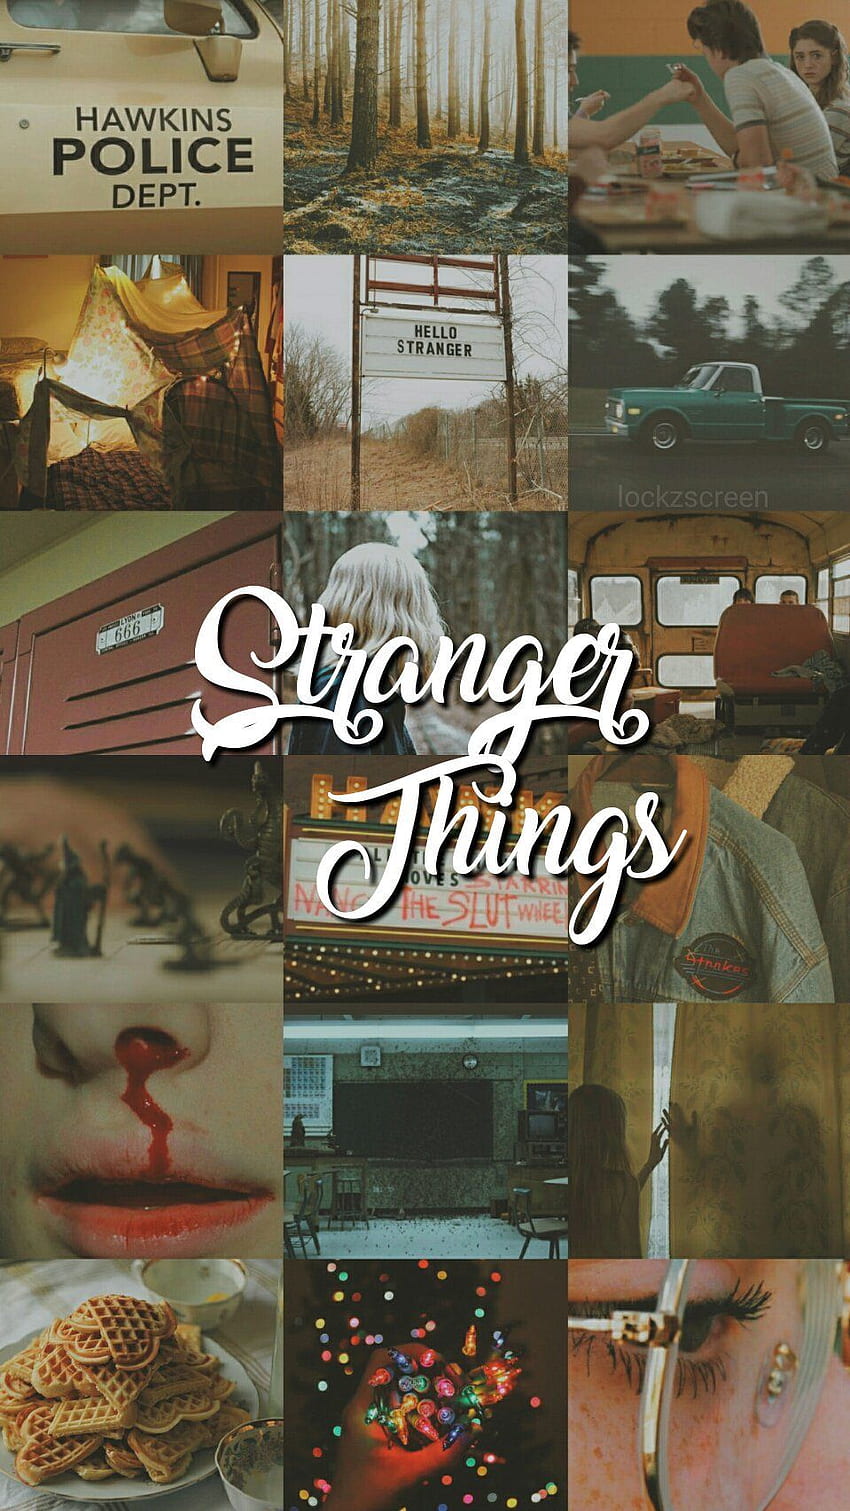 Marilyn monroe : Stranger things . Leading Quotes Magazine, find best quotes collection with inspirational, motivational and wise quotations on what is best and being the best, Stranger Things Quotes HD phone wallpaper